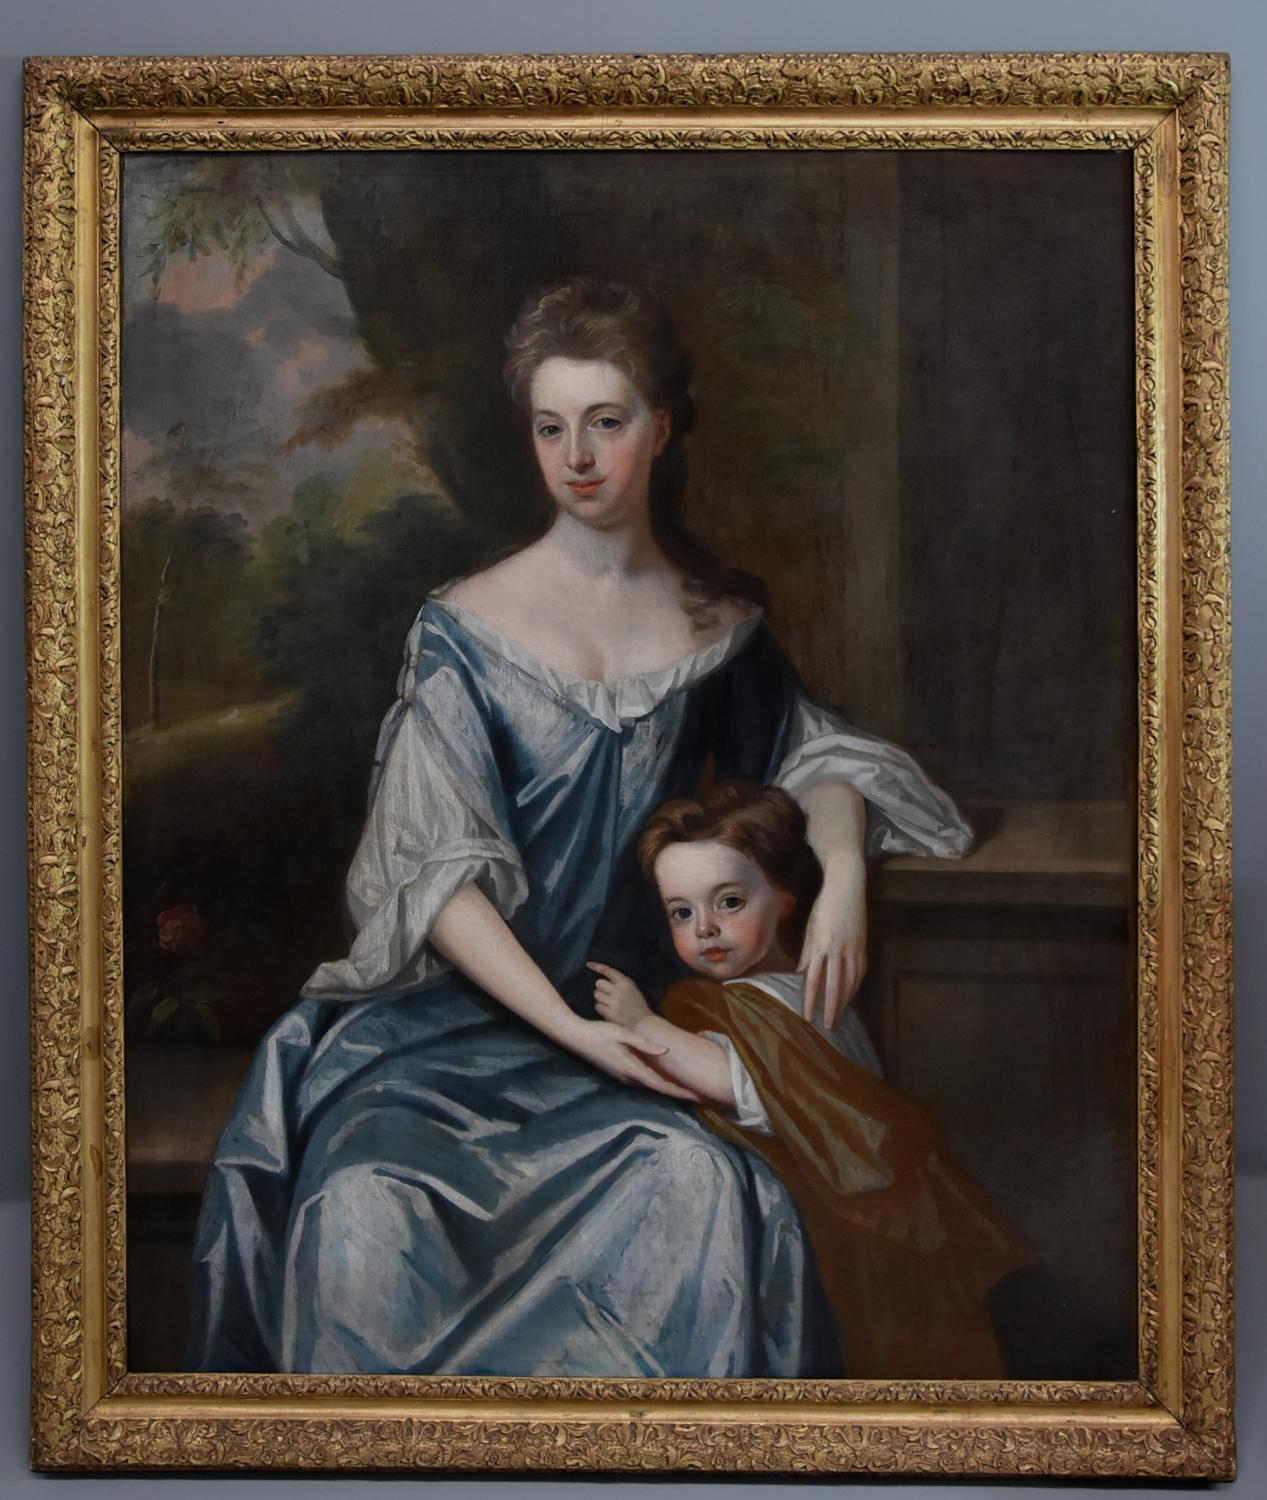 Large 18thc oil painting 'Lady & Child', attributed to Michael Dahl